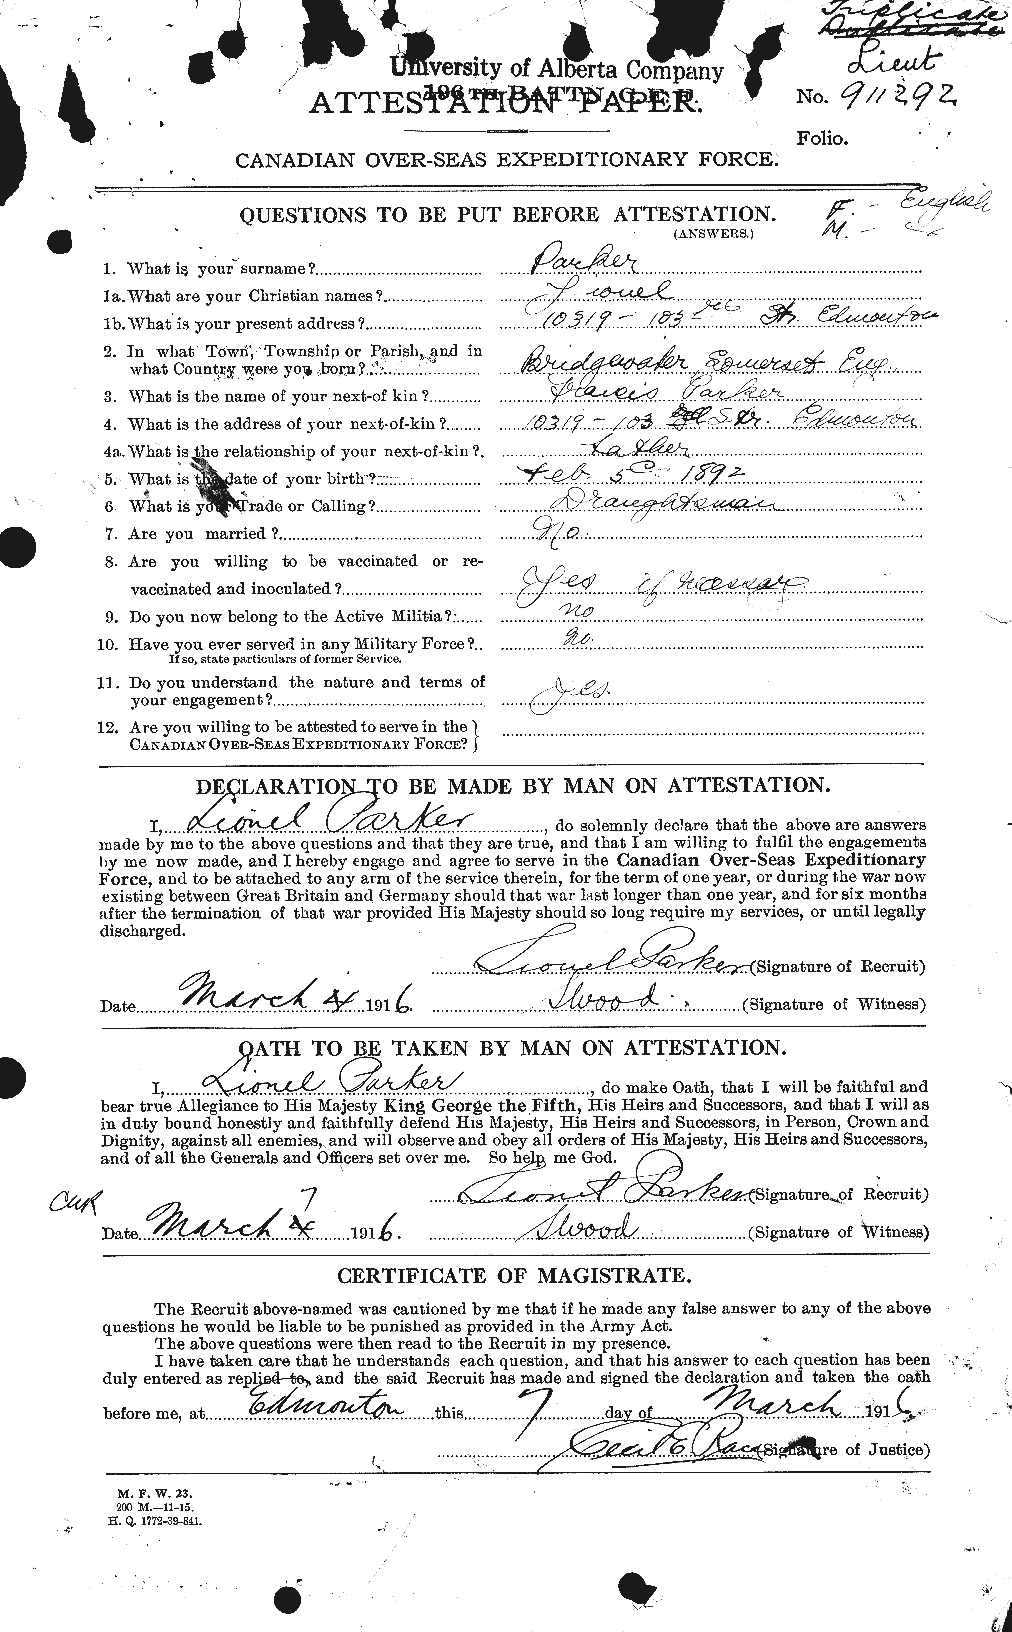 Personnel Records of the First World War - CEF 565533a